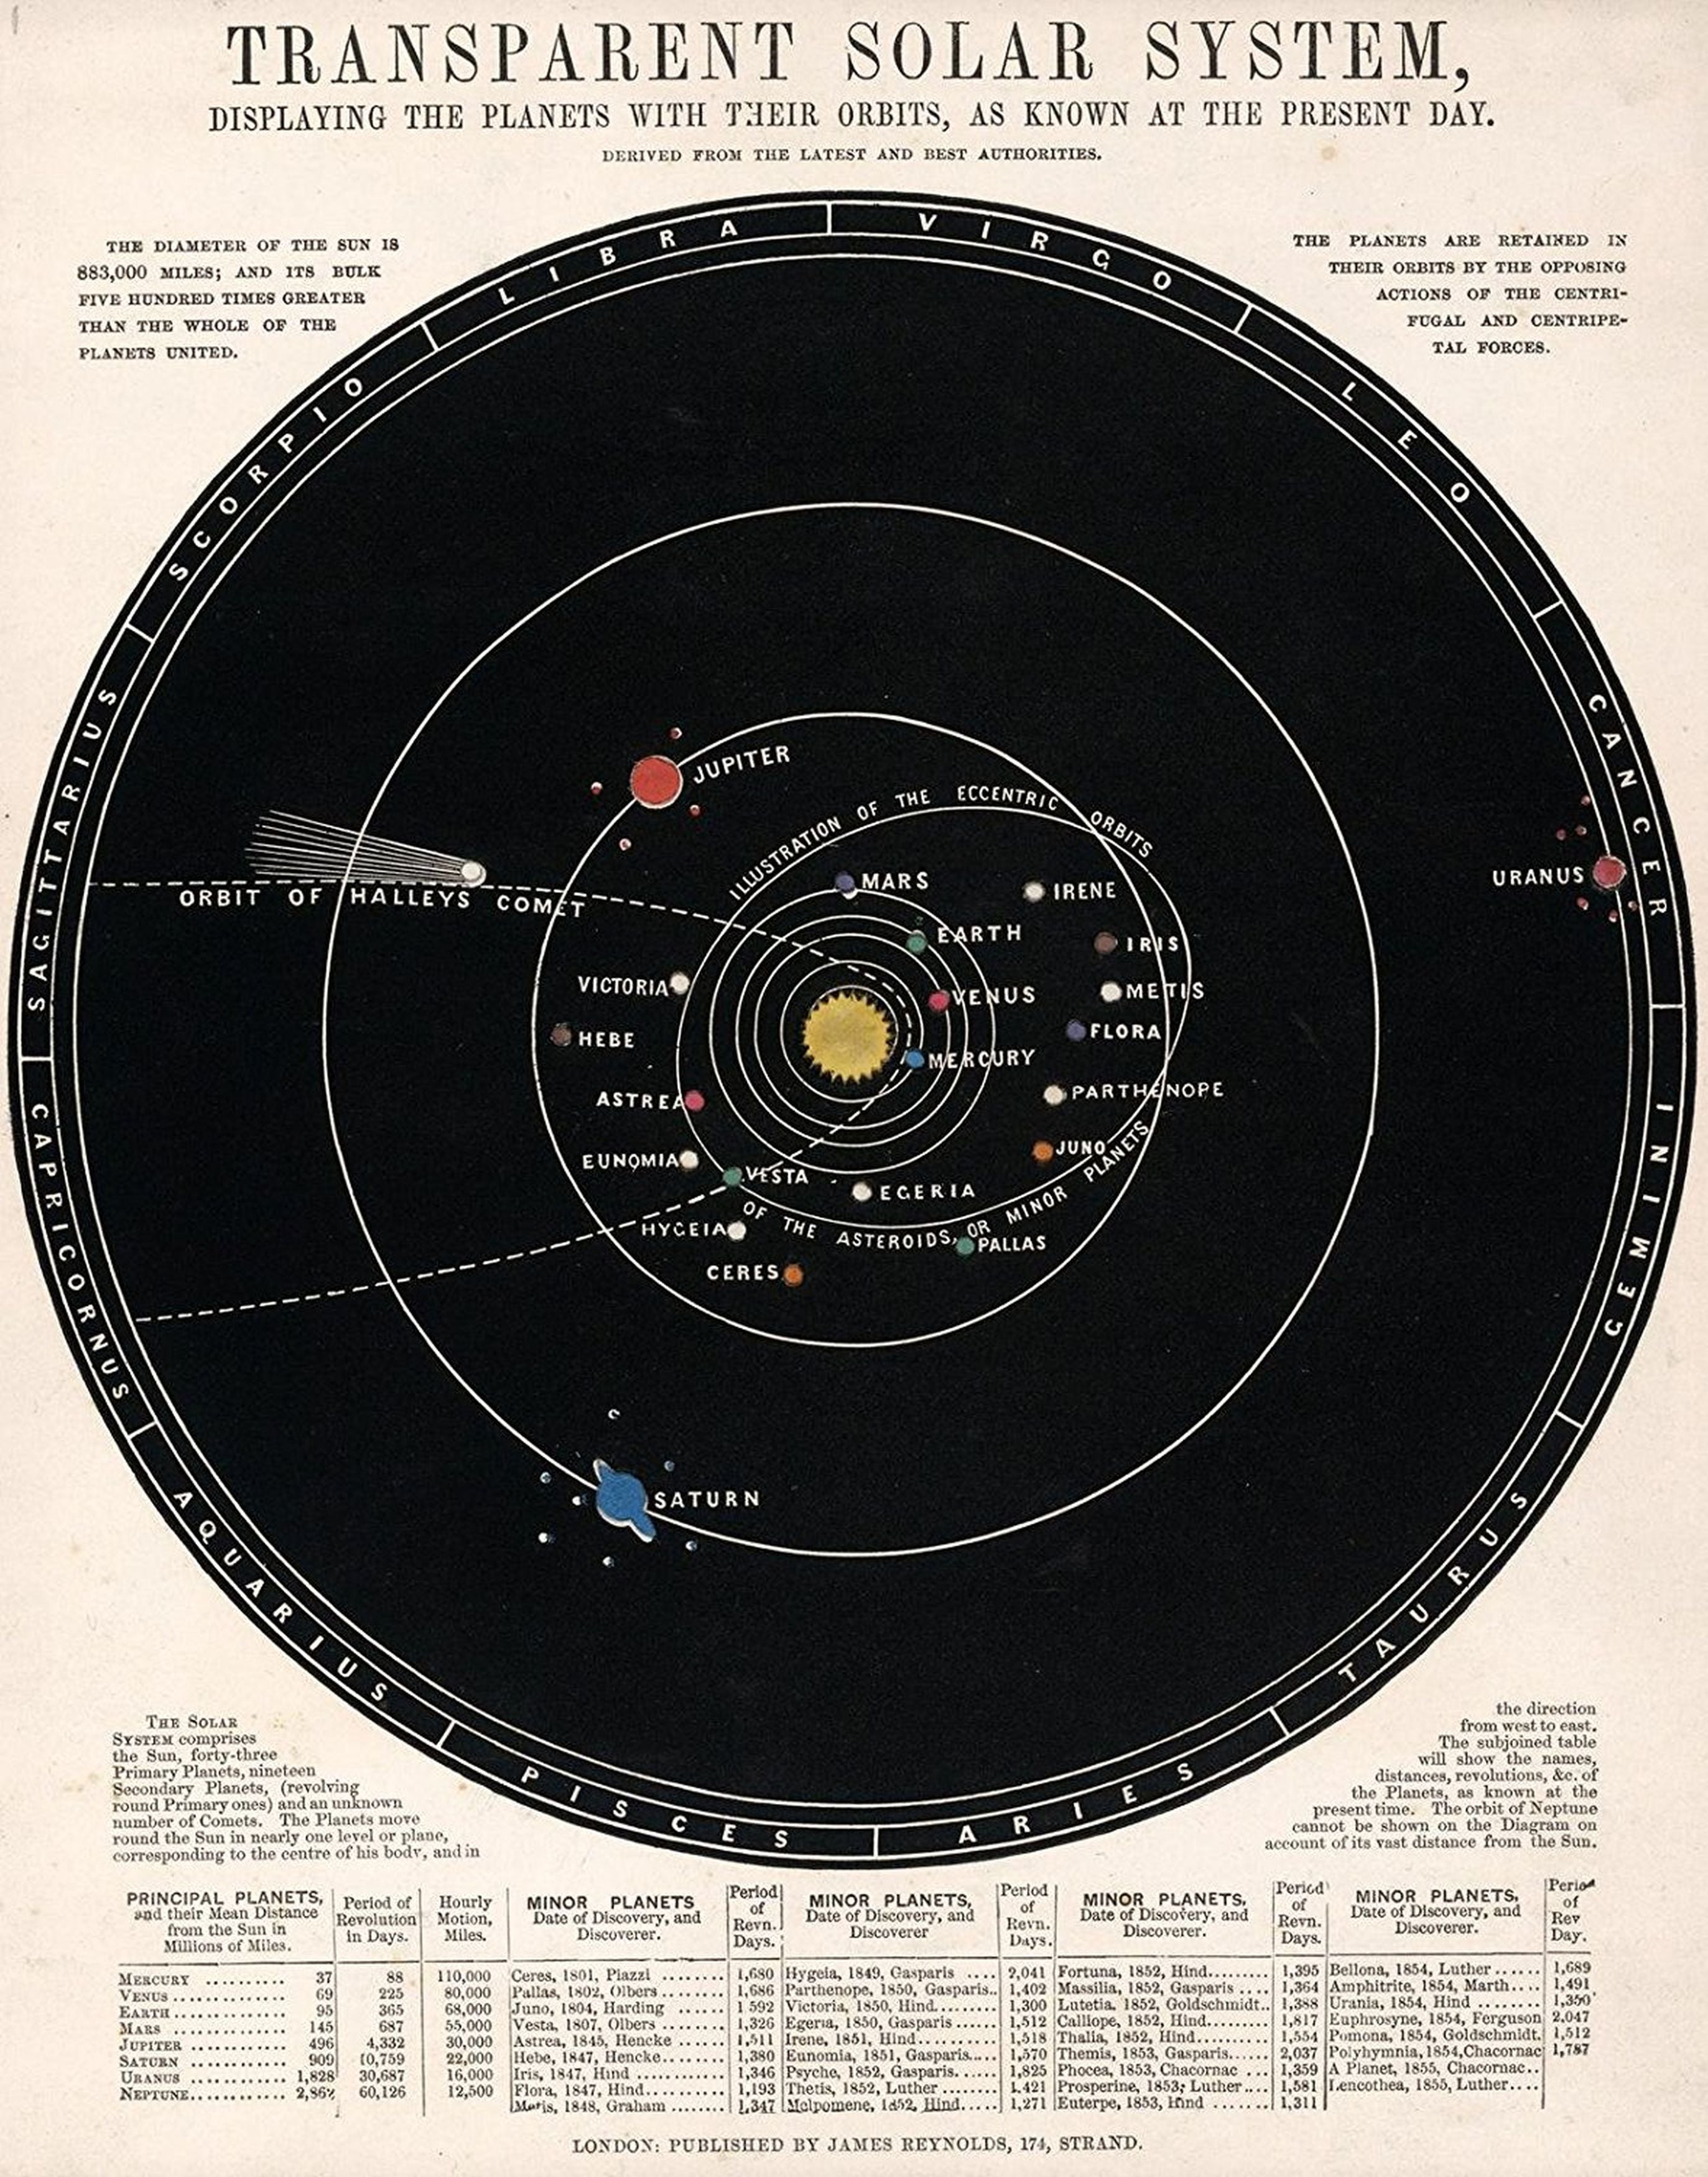 Transparent Solar System: Displaying the planets with their orbits, as known at the present day. Derived from the latest and best authorities. London. Published by James Reynolds 174 Strand. (to accompany) Astronomical diagrams., Astronomy. Drawn and eng